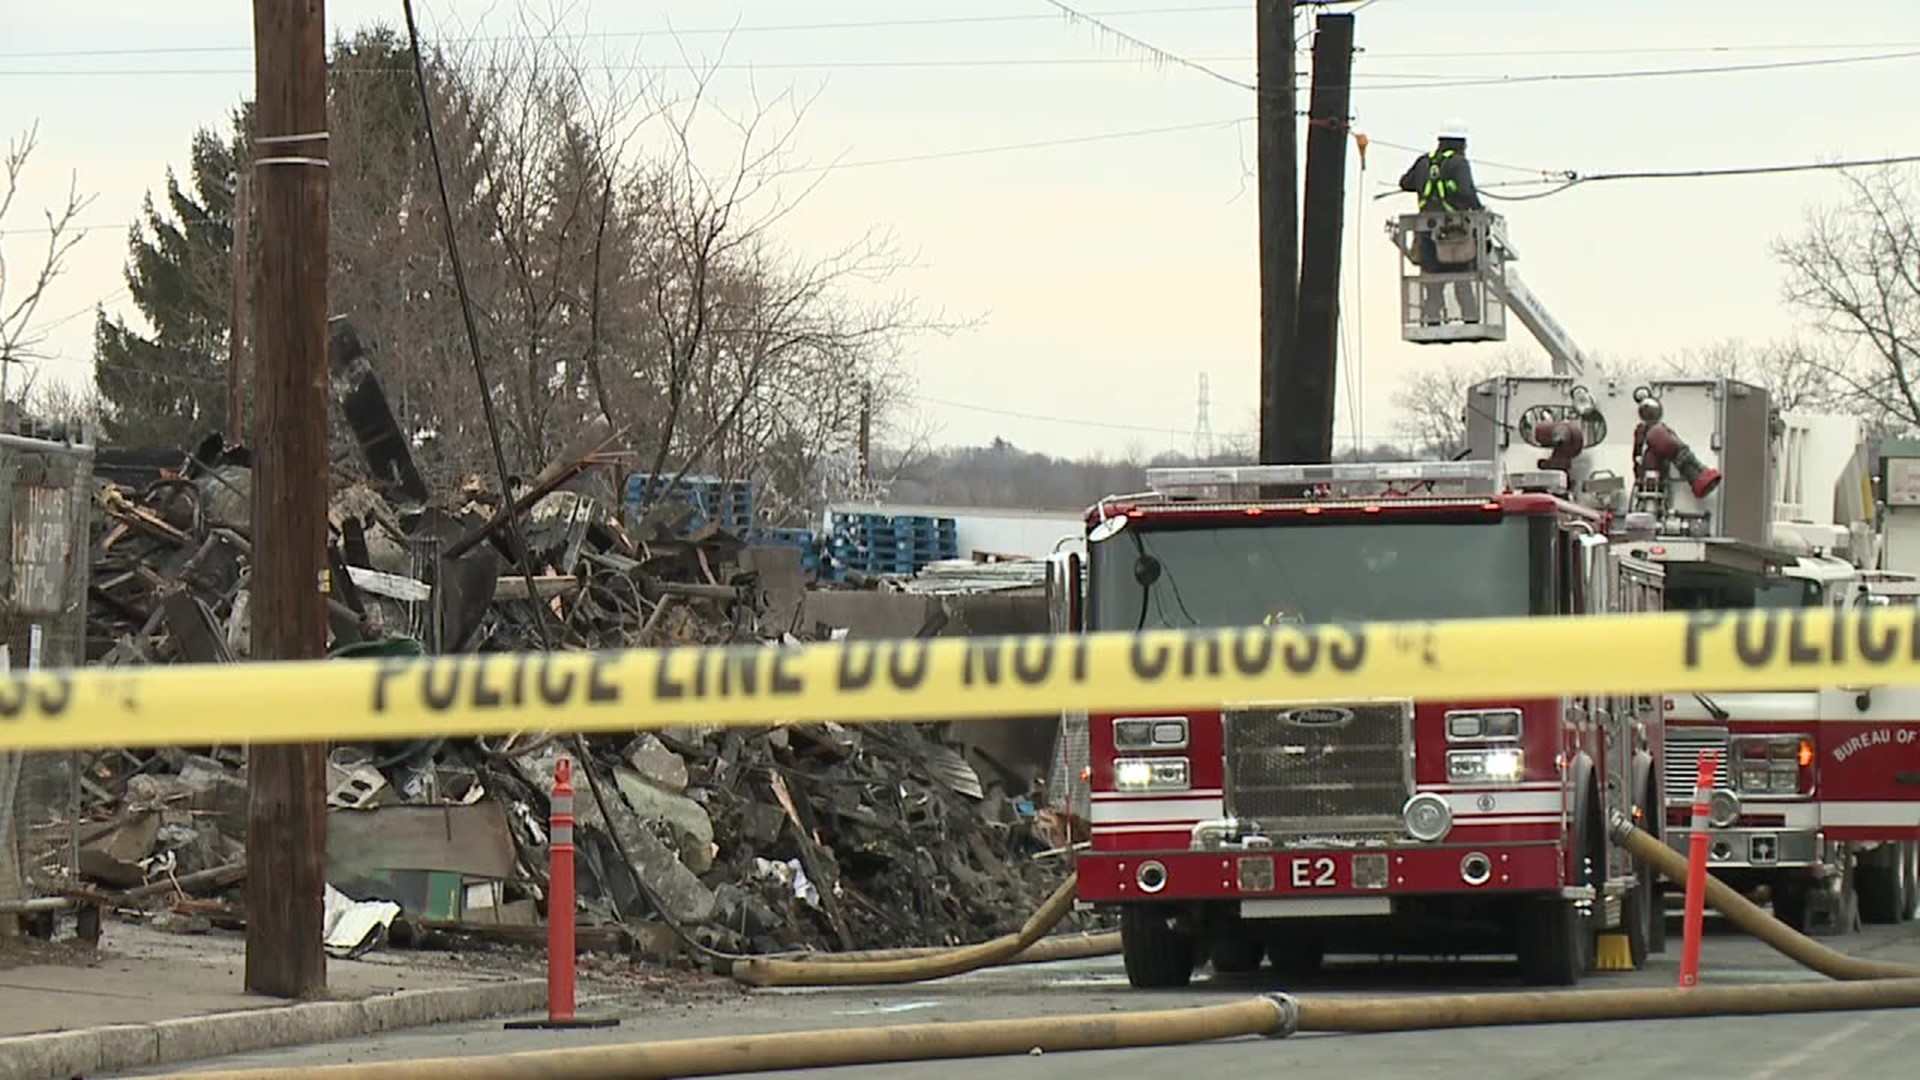 Crews continued to fight remnants of Monday's massive fire at a scrap and recycling center in Wilkes-Barre.